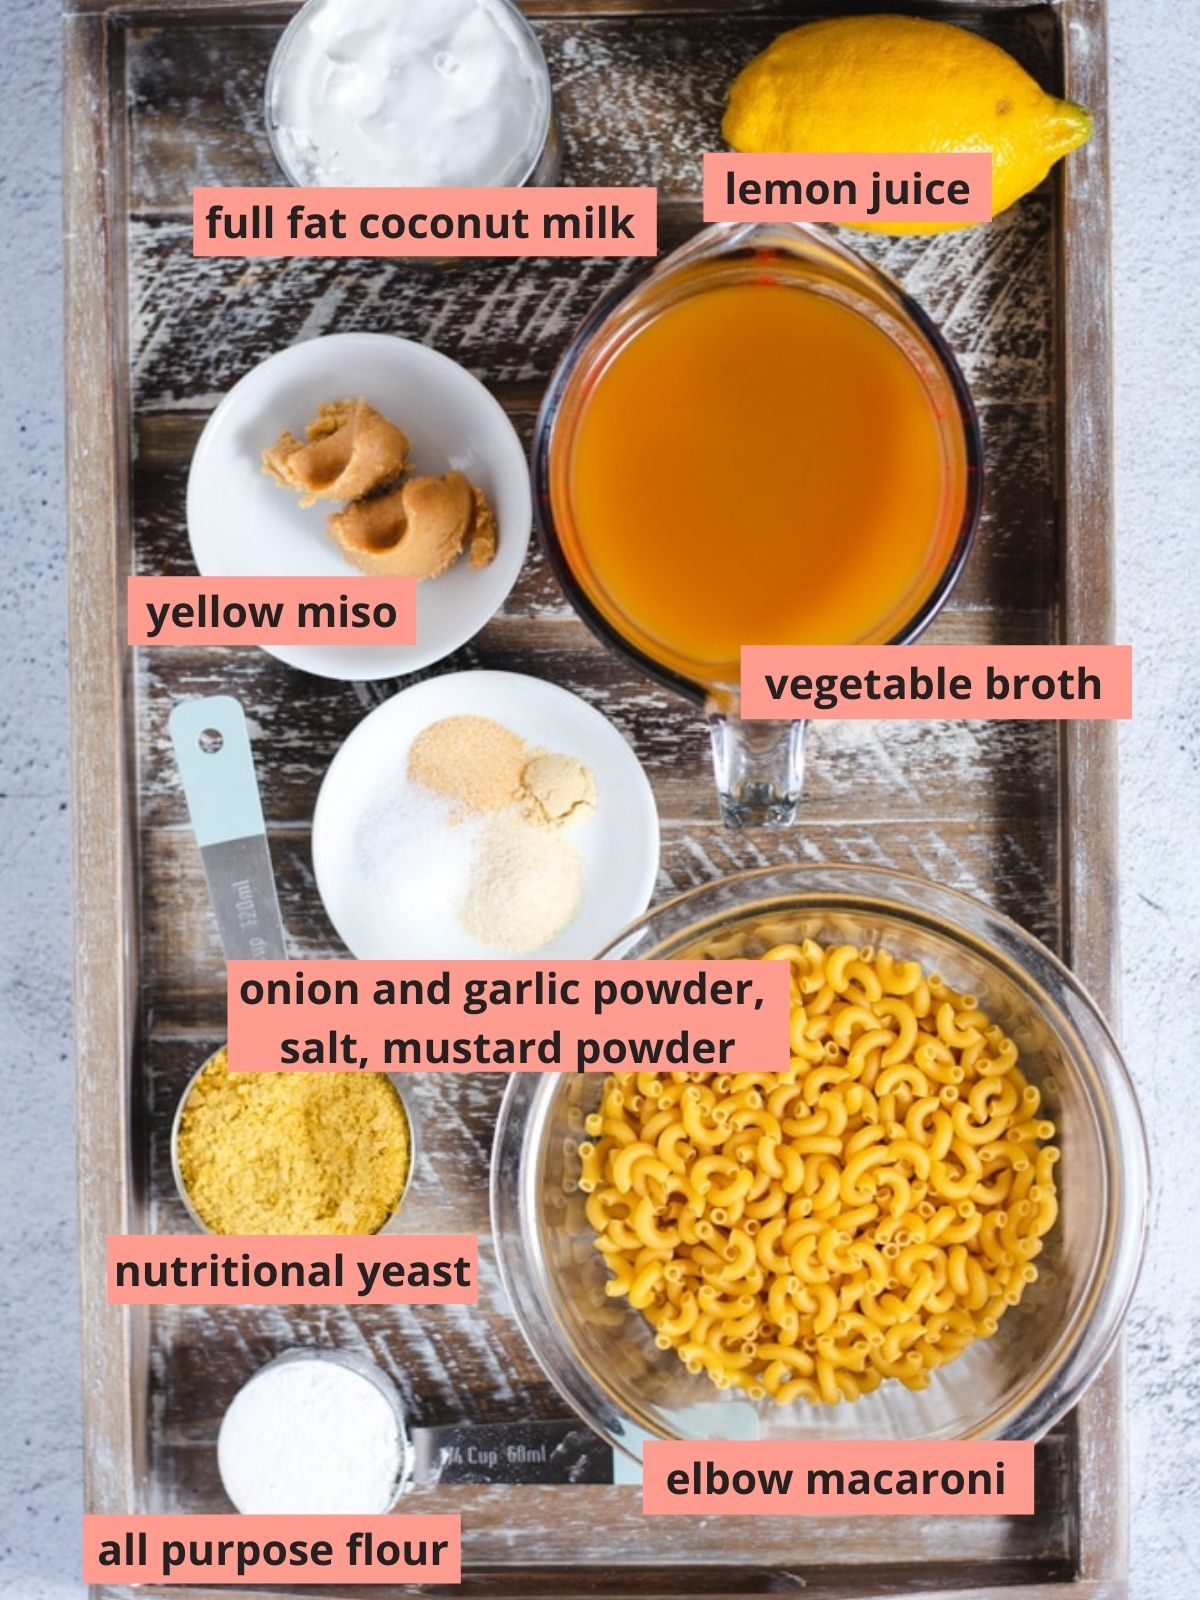 Labeled ingredients used to make vegan mac and cheese.